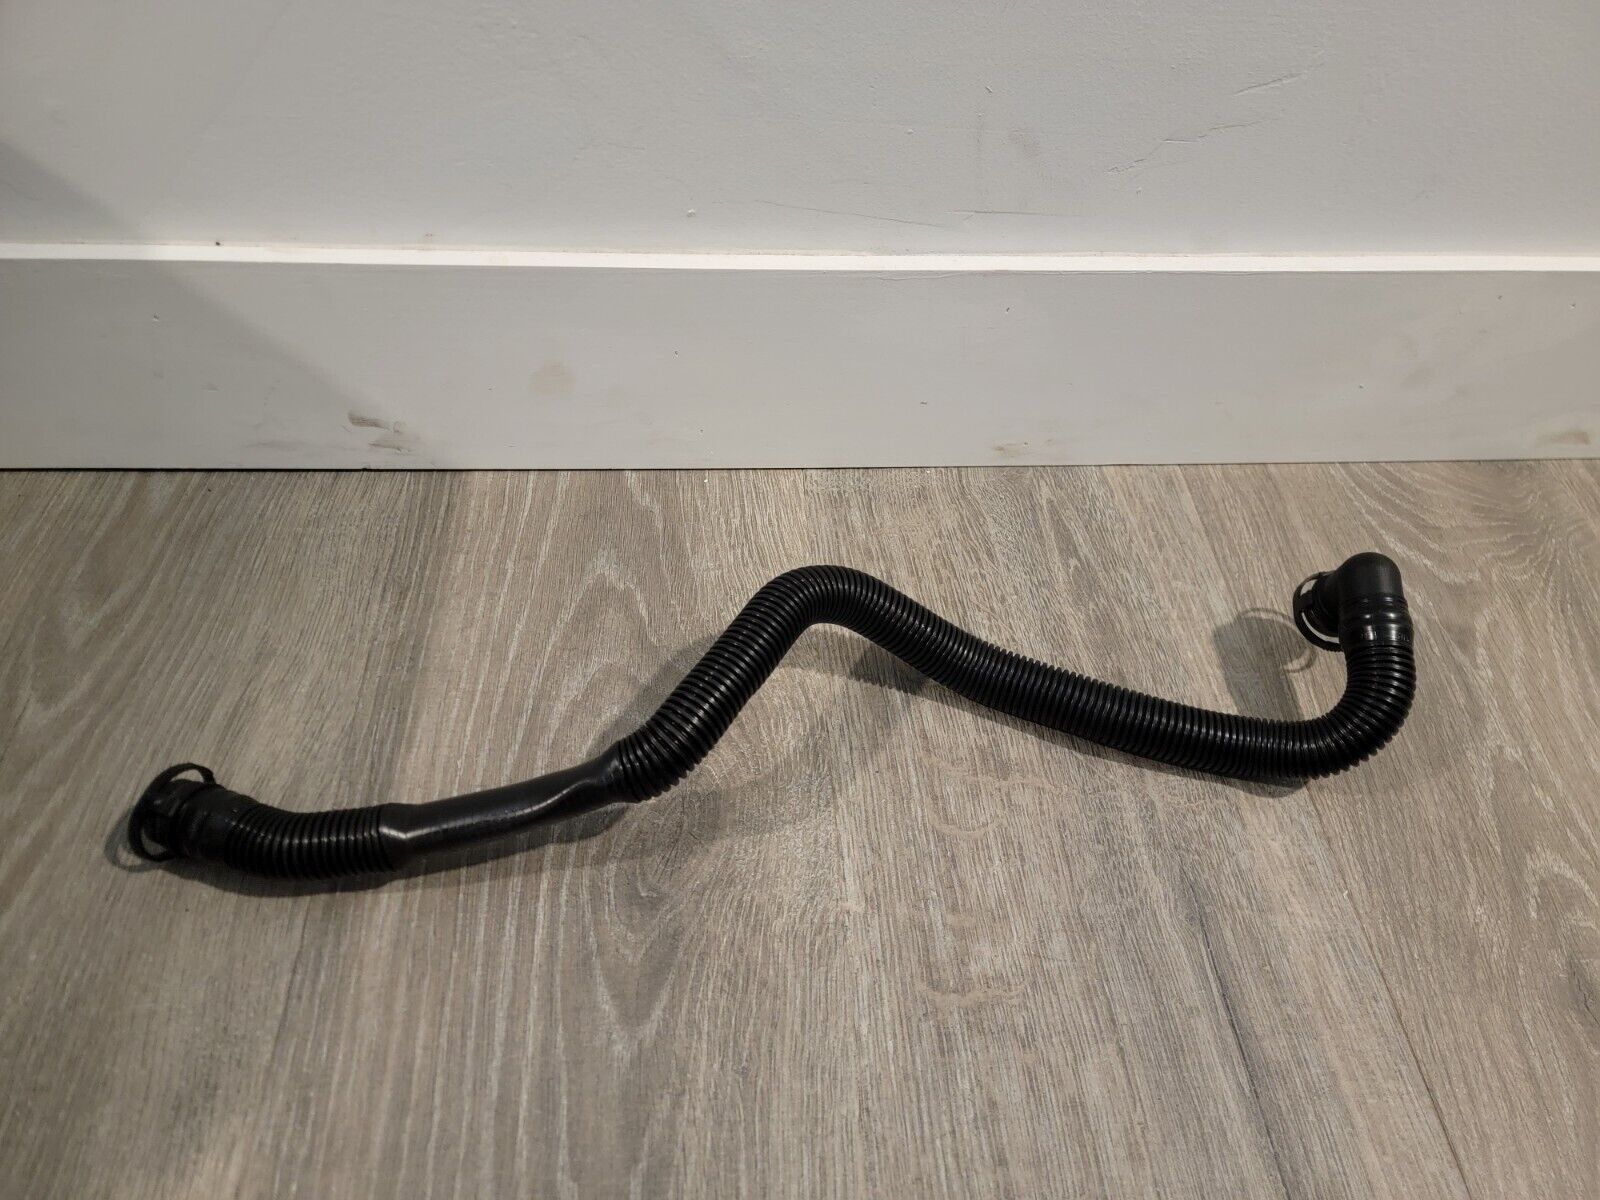 2009-2016 Audi S4,S5 3.0L Engine Bay Secondary Injection Air Intake Hose Pipe B8